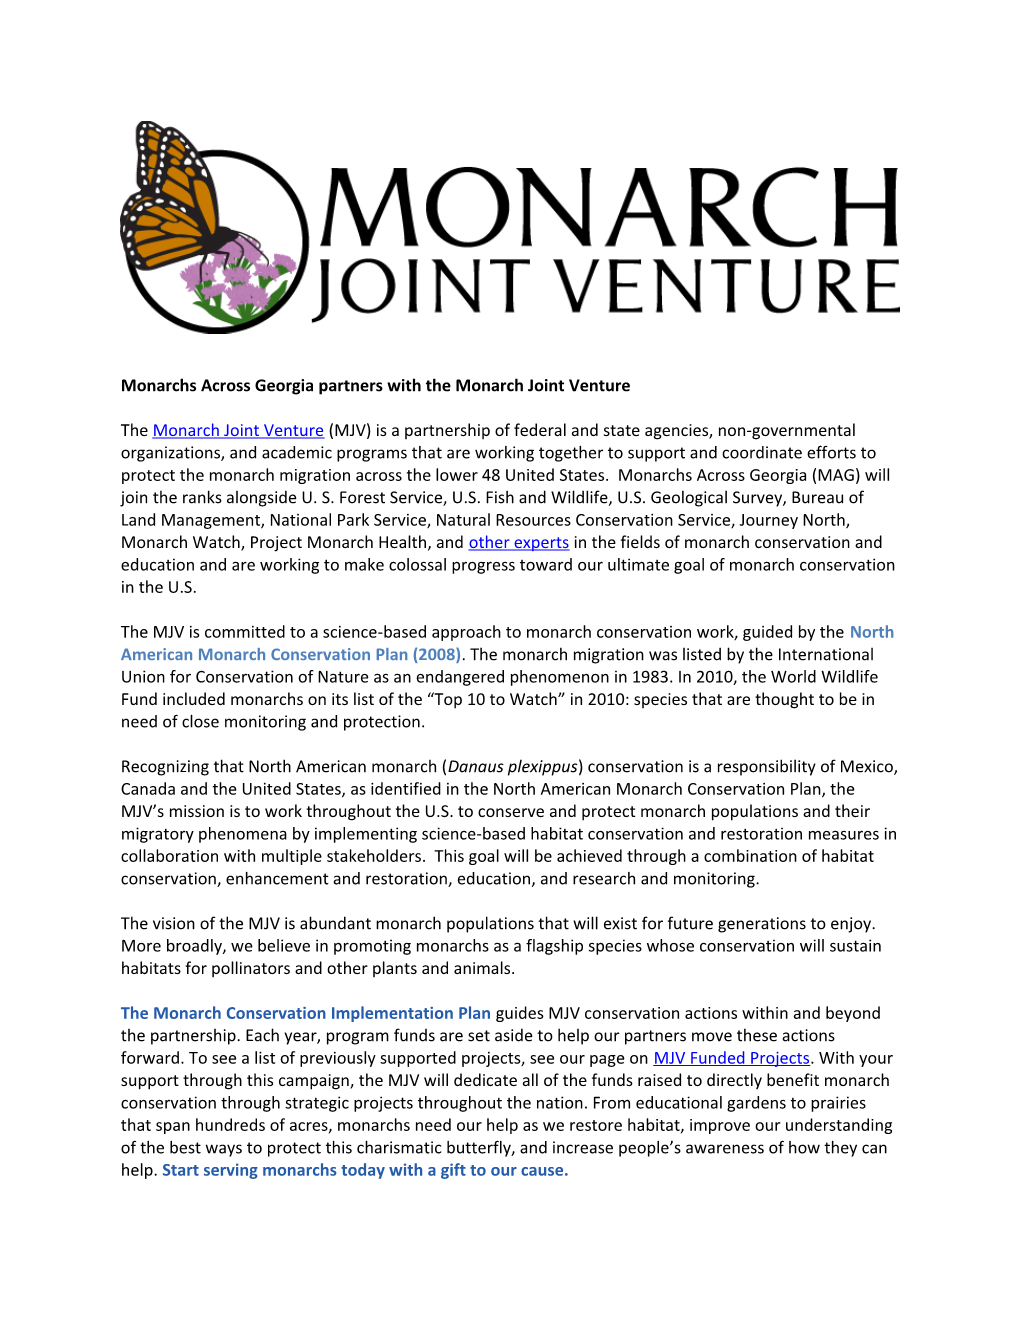 Monarchs Across Georgia Partners with the Monarch Joint Venture